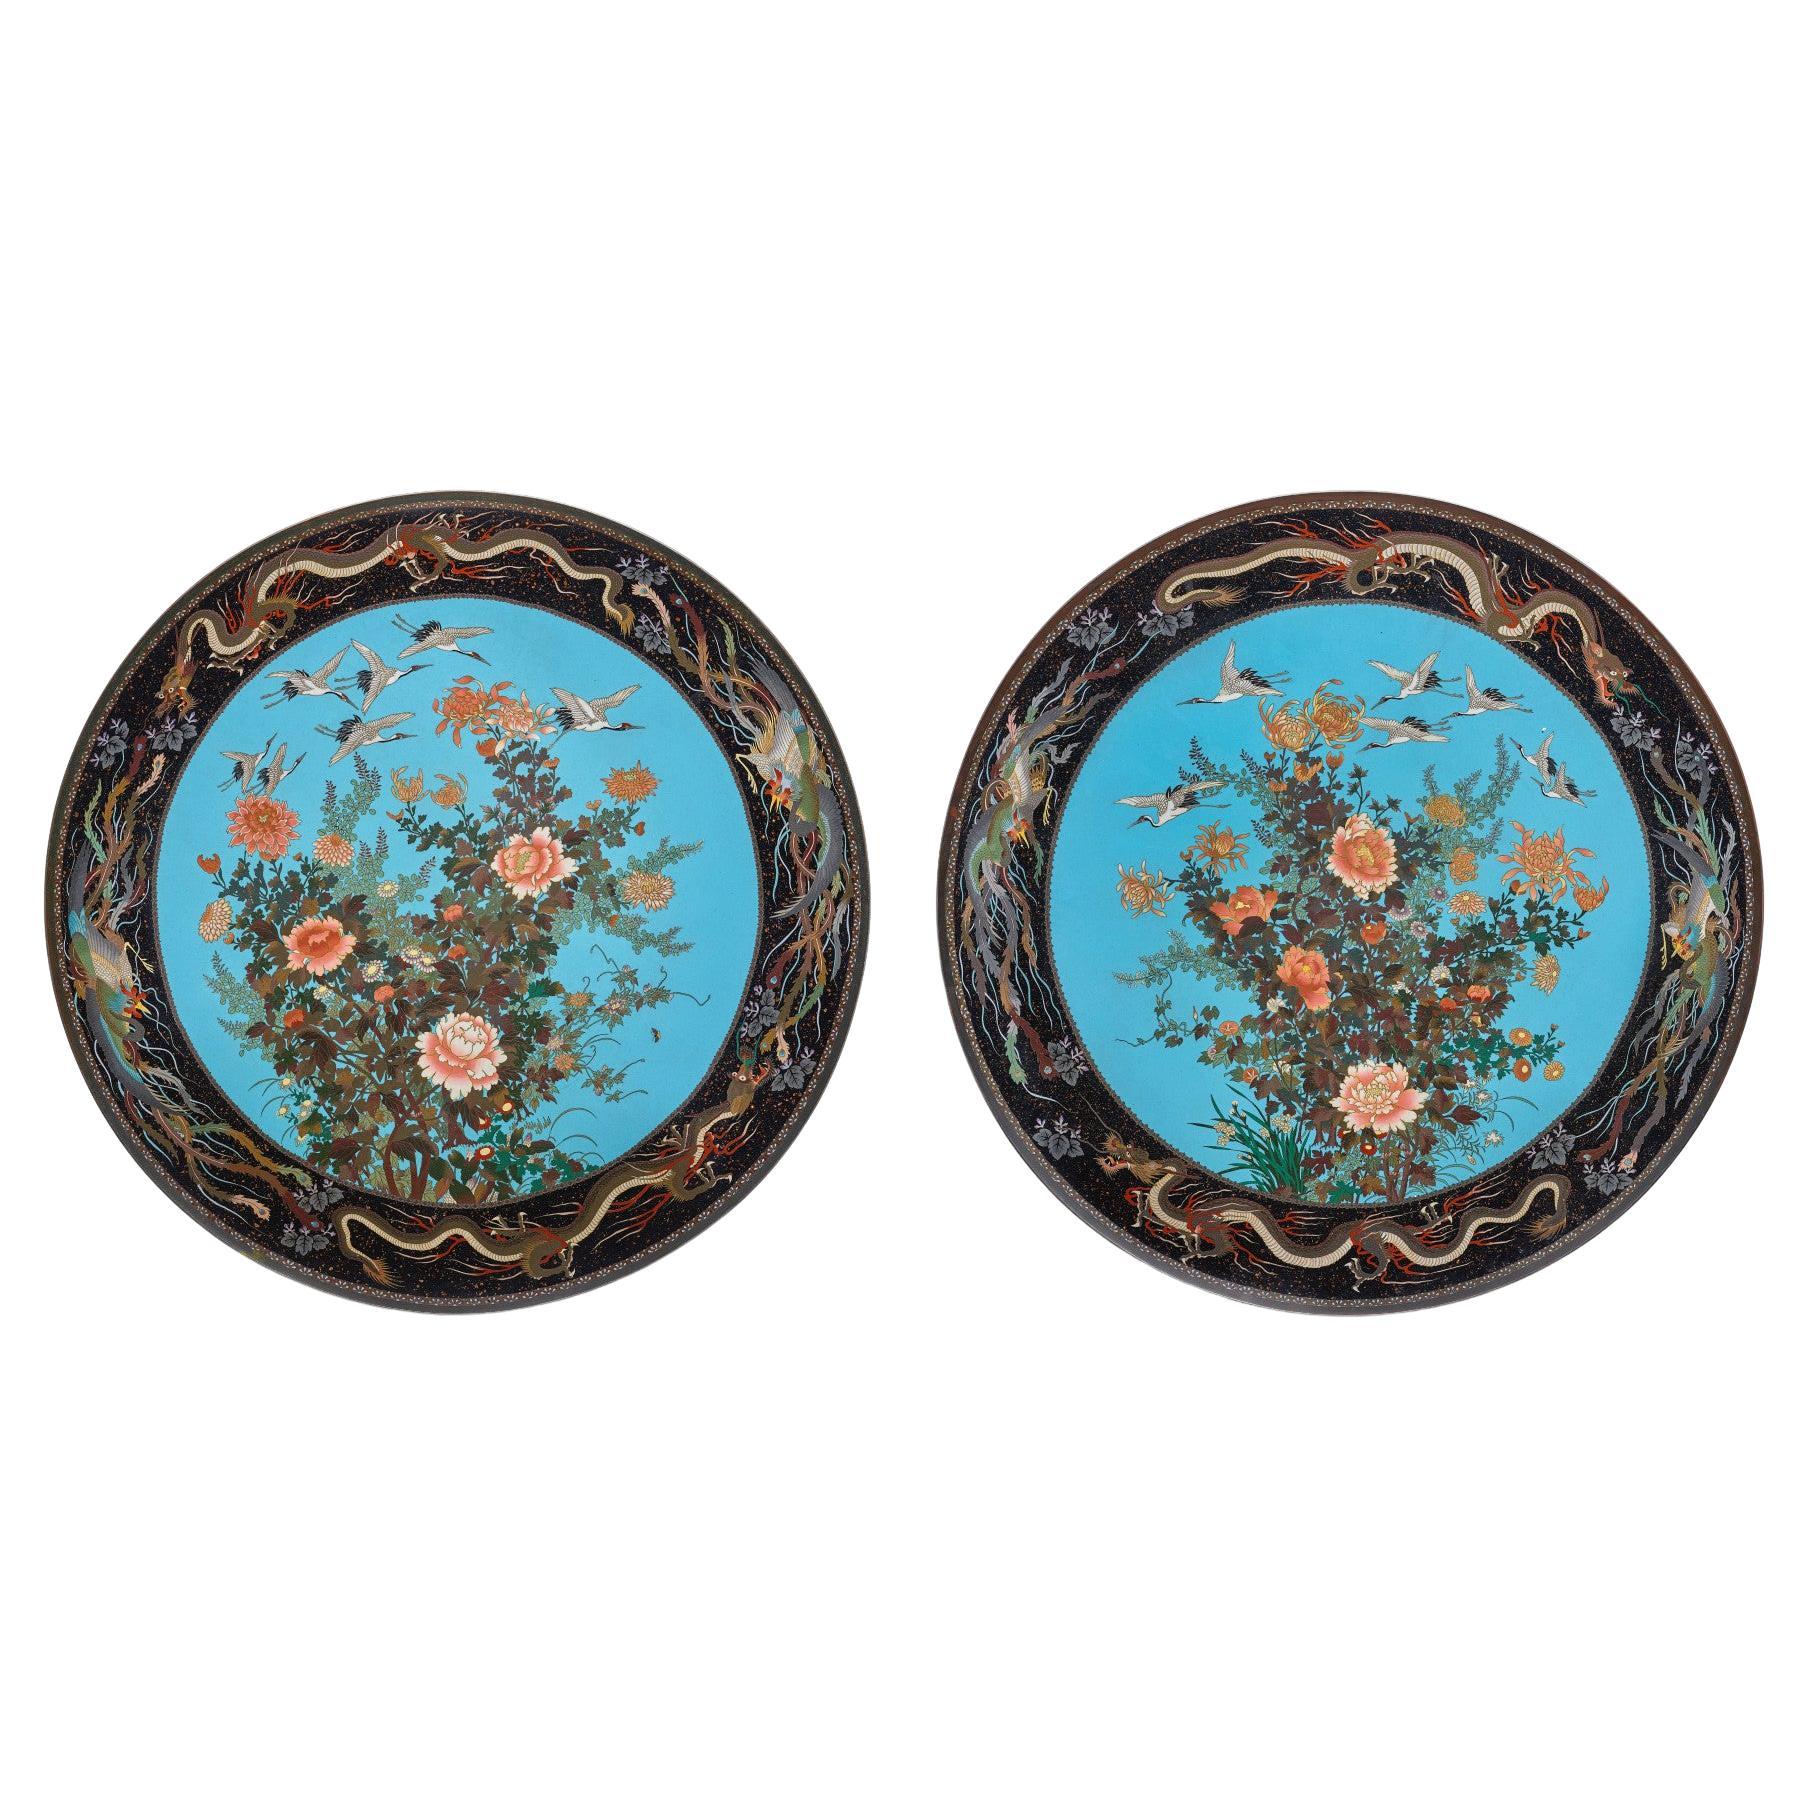 Massive Museum Pair of Meiji Period Japanese Cloisonne Enamel Chargers Plates For Sale